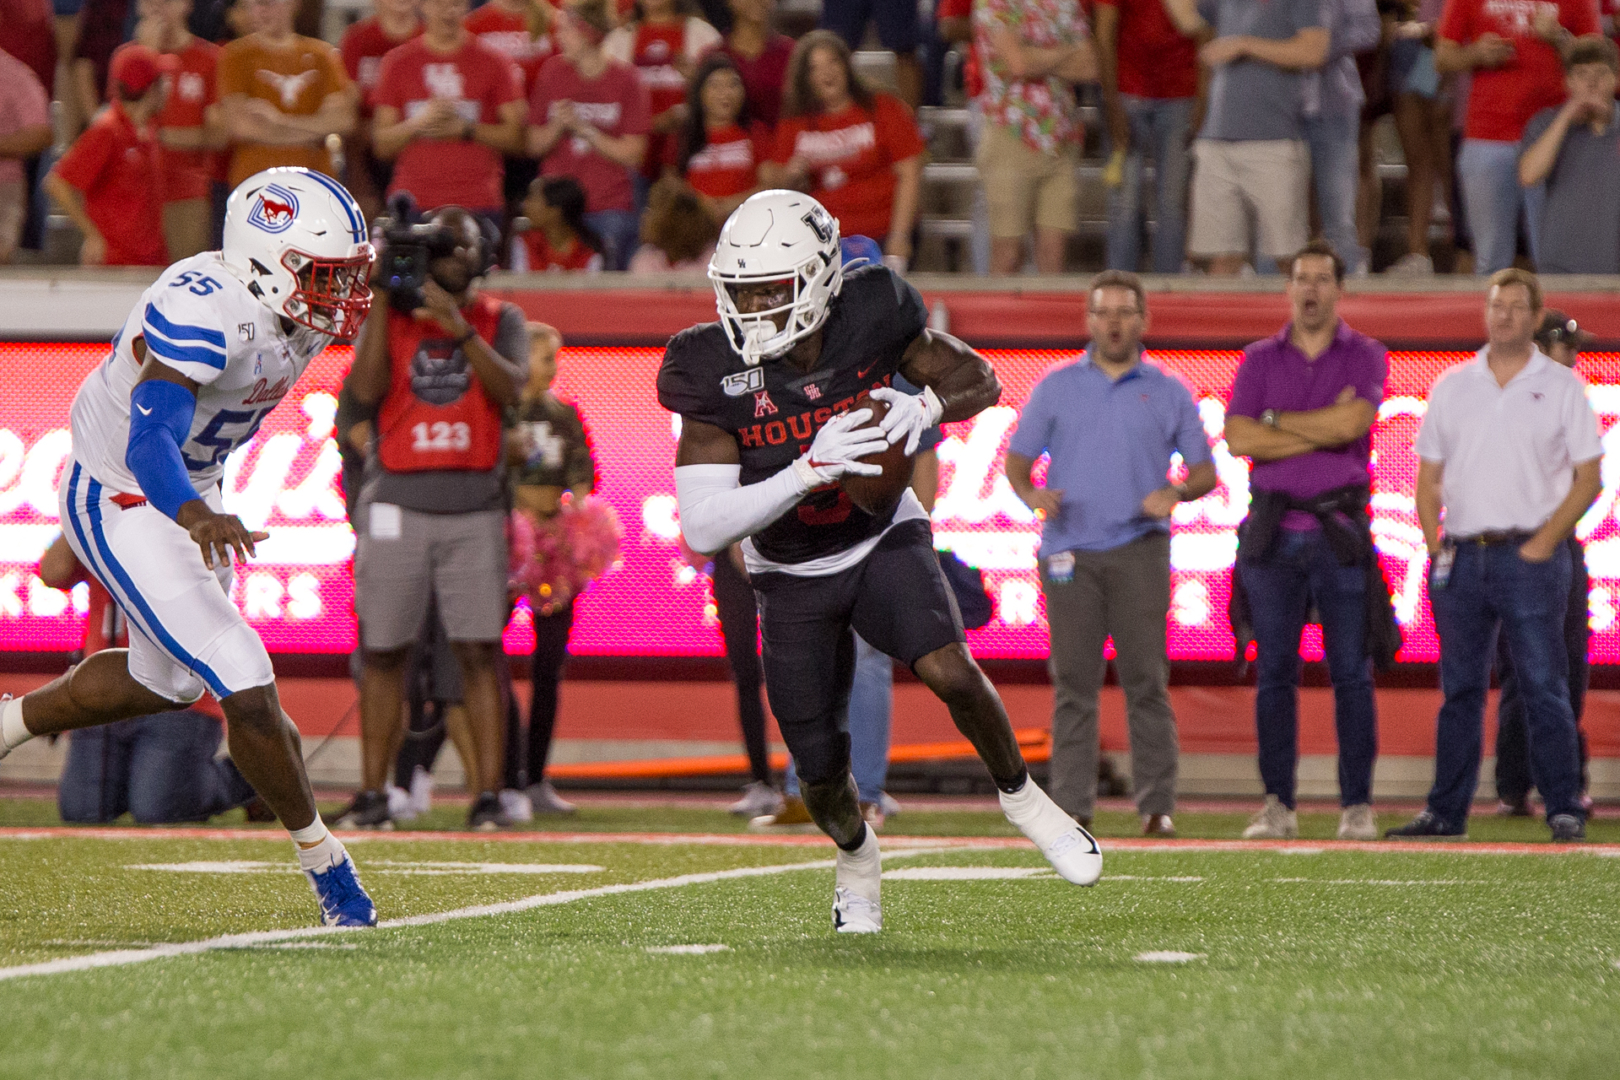 UH football receiver Marquez Stevenson tries to speed past an SMU defender during the 2019 season. | Trevor Nolley/The Cougar